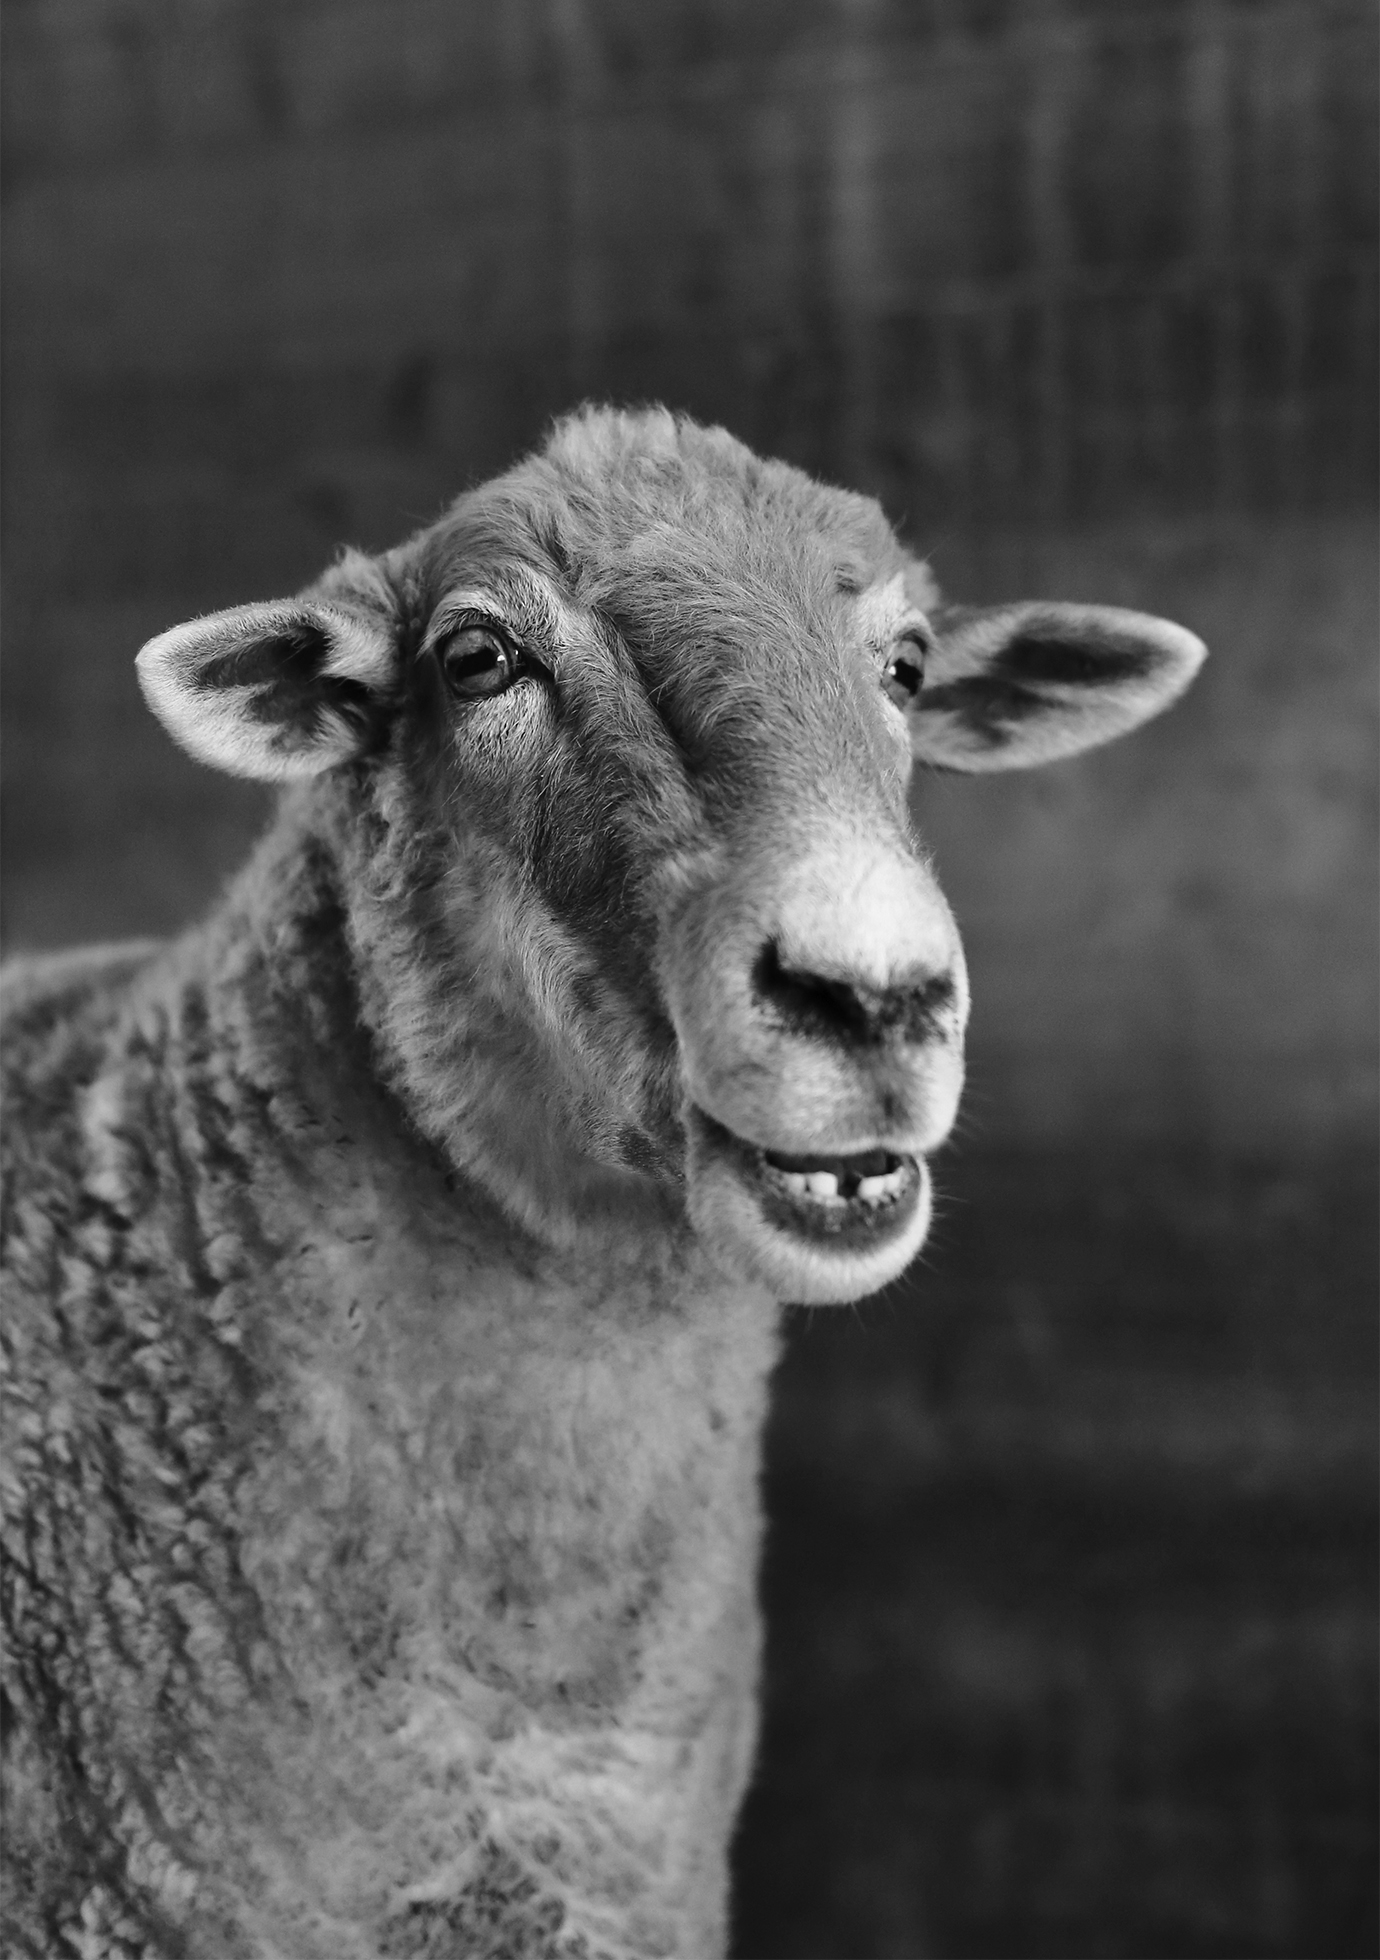 Close-up of a ewe facing the camera with its mouth slightly open. The ears are horizontal and forward-facing.